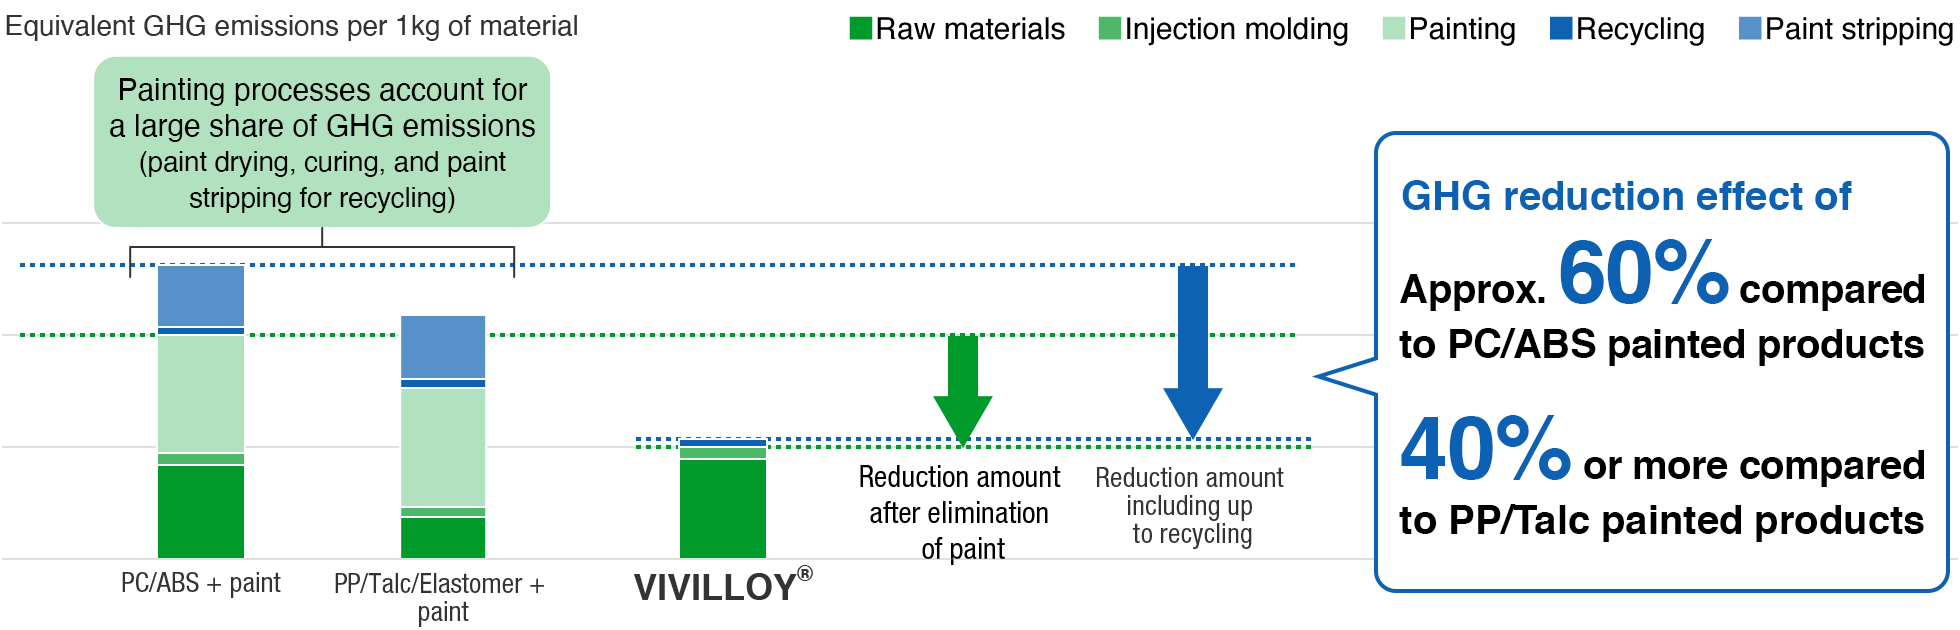 GHG reduction effect from elimination of paint